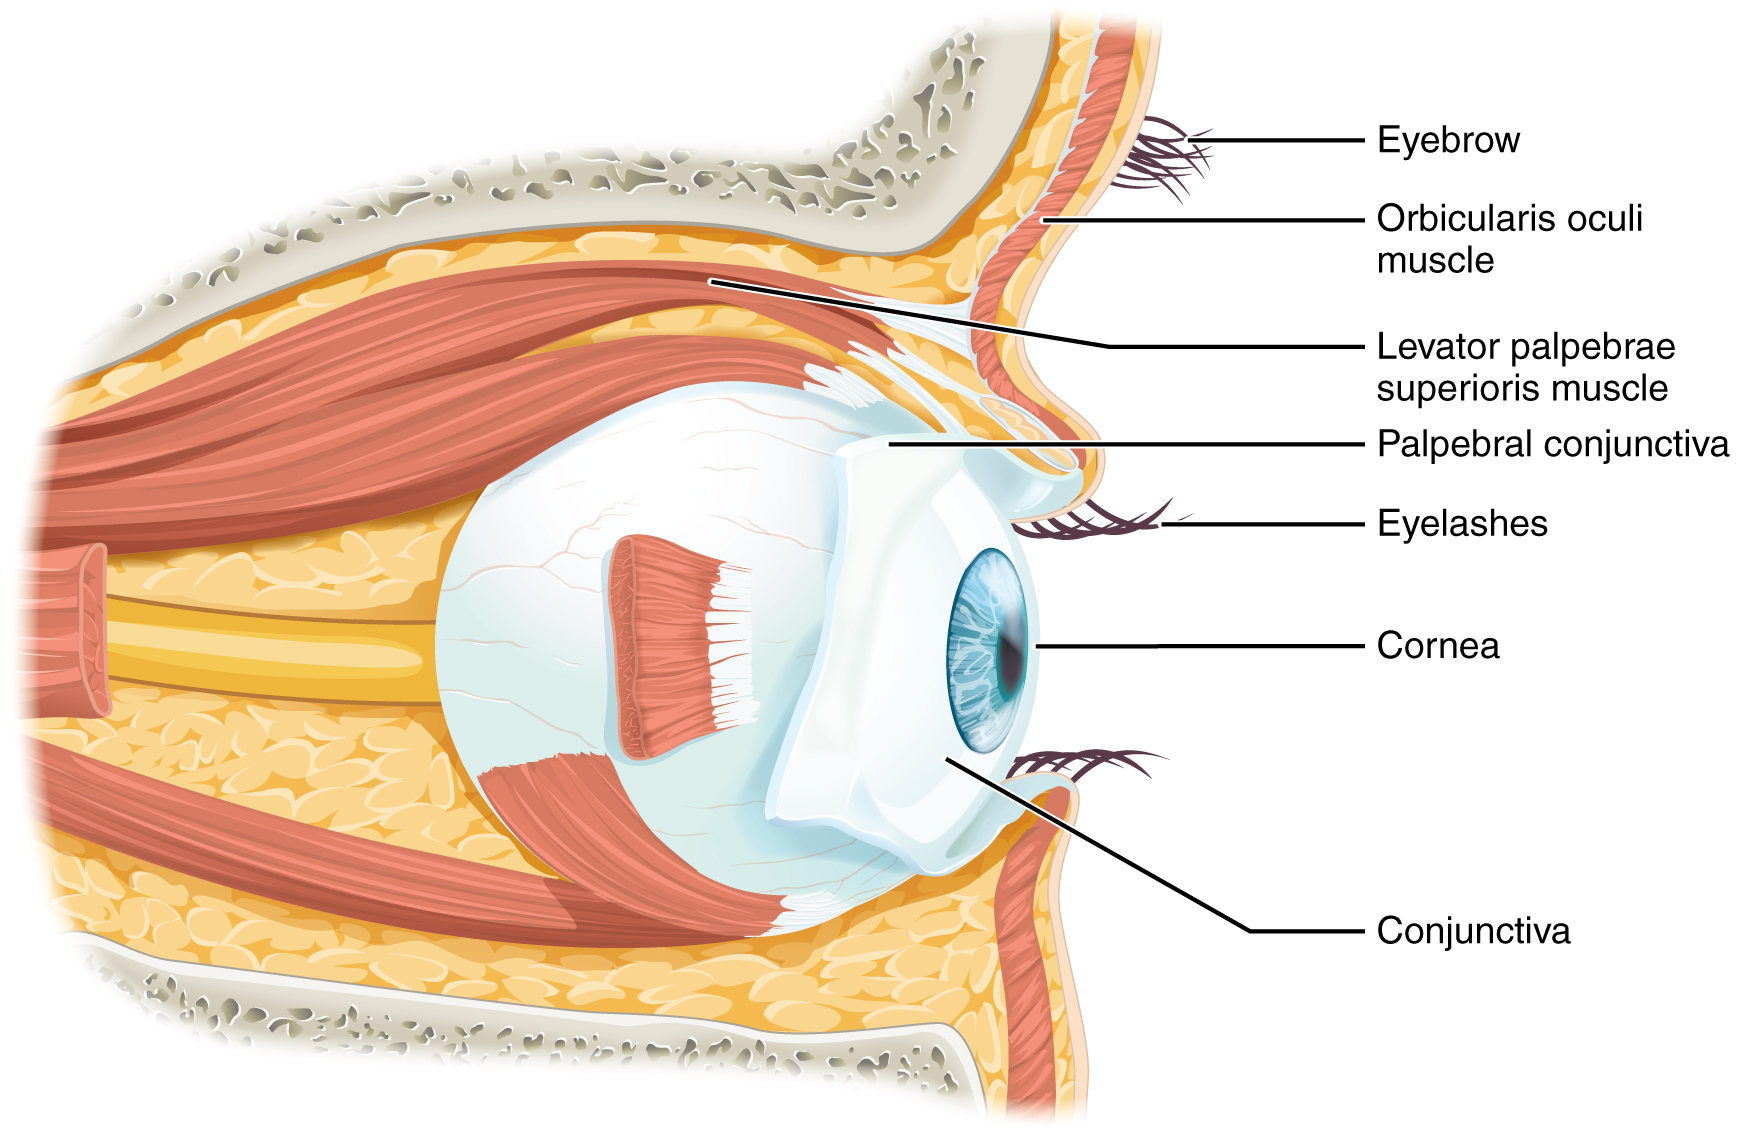 Lateral view of the eye. Image description available.